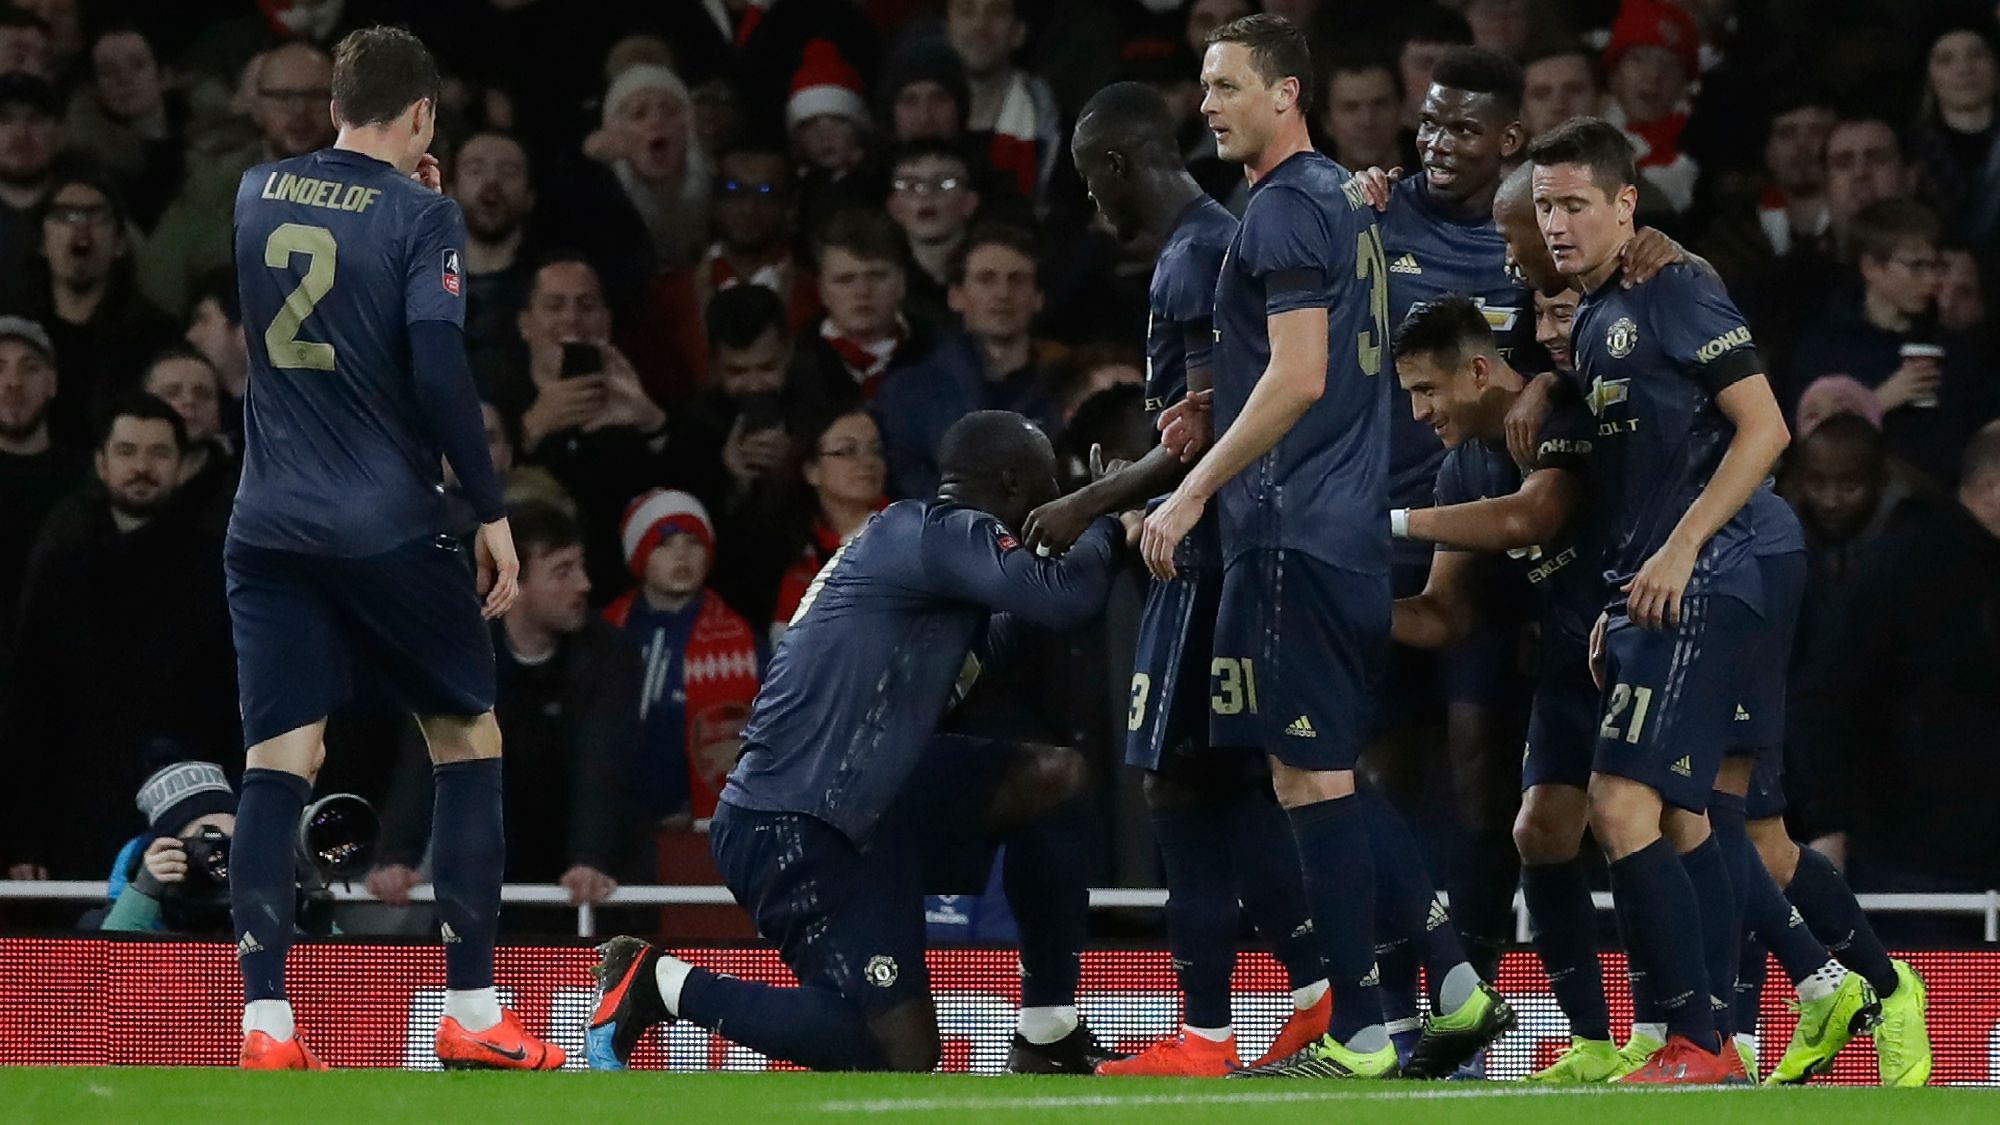 Manchester United’s Alexis Sanchez celebrates with teammates after scoring his side’s opening goal during the English FA Cup fourth round  match between Arsenal and Manchester United at the Emirates stadium in London on Friday, Jan. 25.